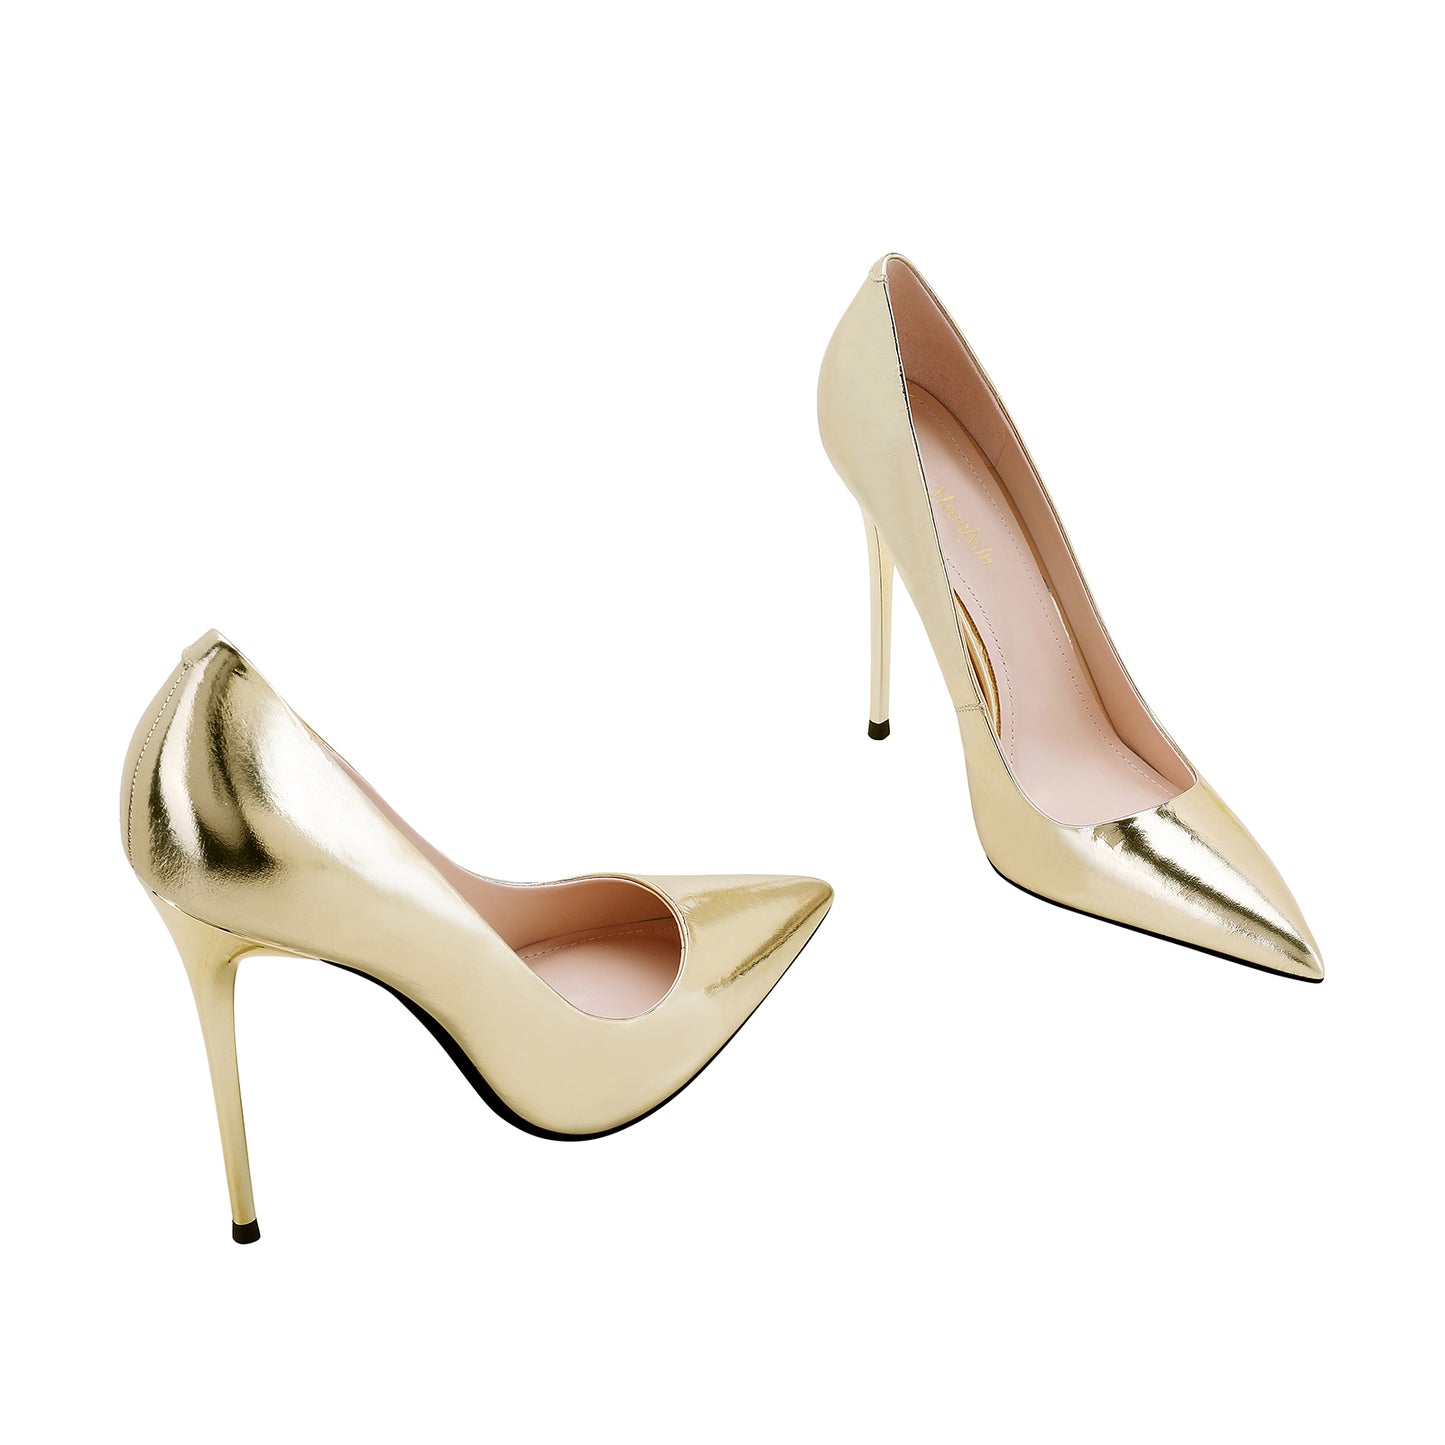 Slip-On Stiletto Pumps, Leather Featuring Pointed Toe High Heel